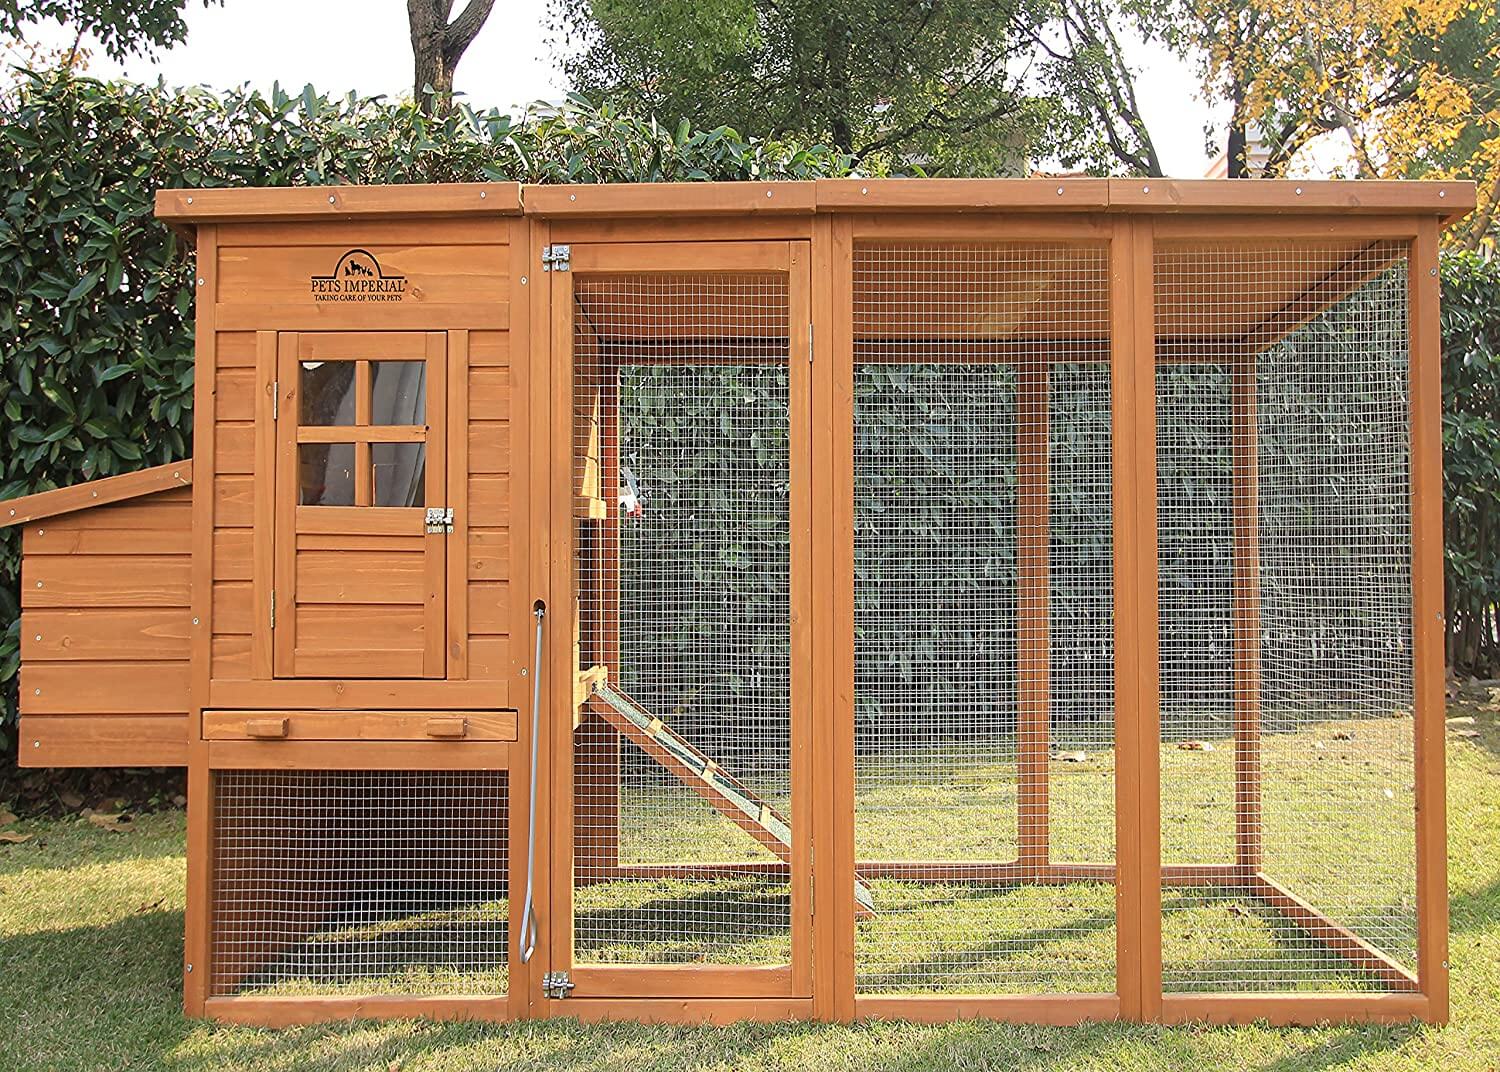 chicken coop to house your baby chicks. click image to buy now.